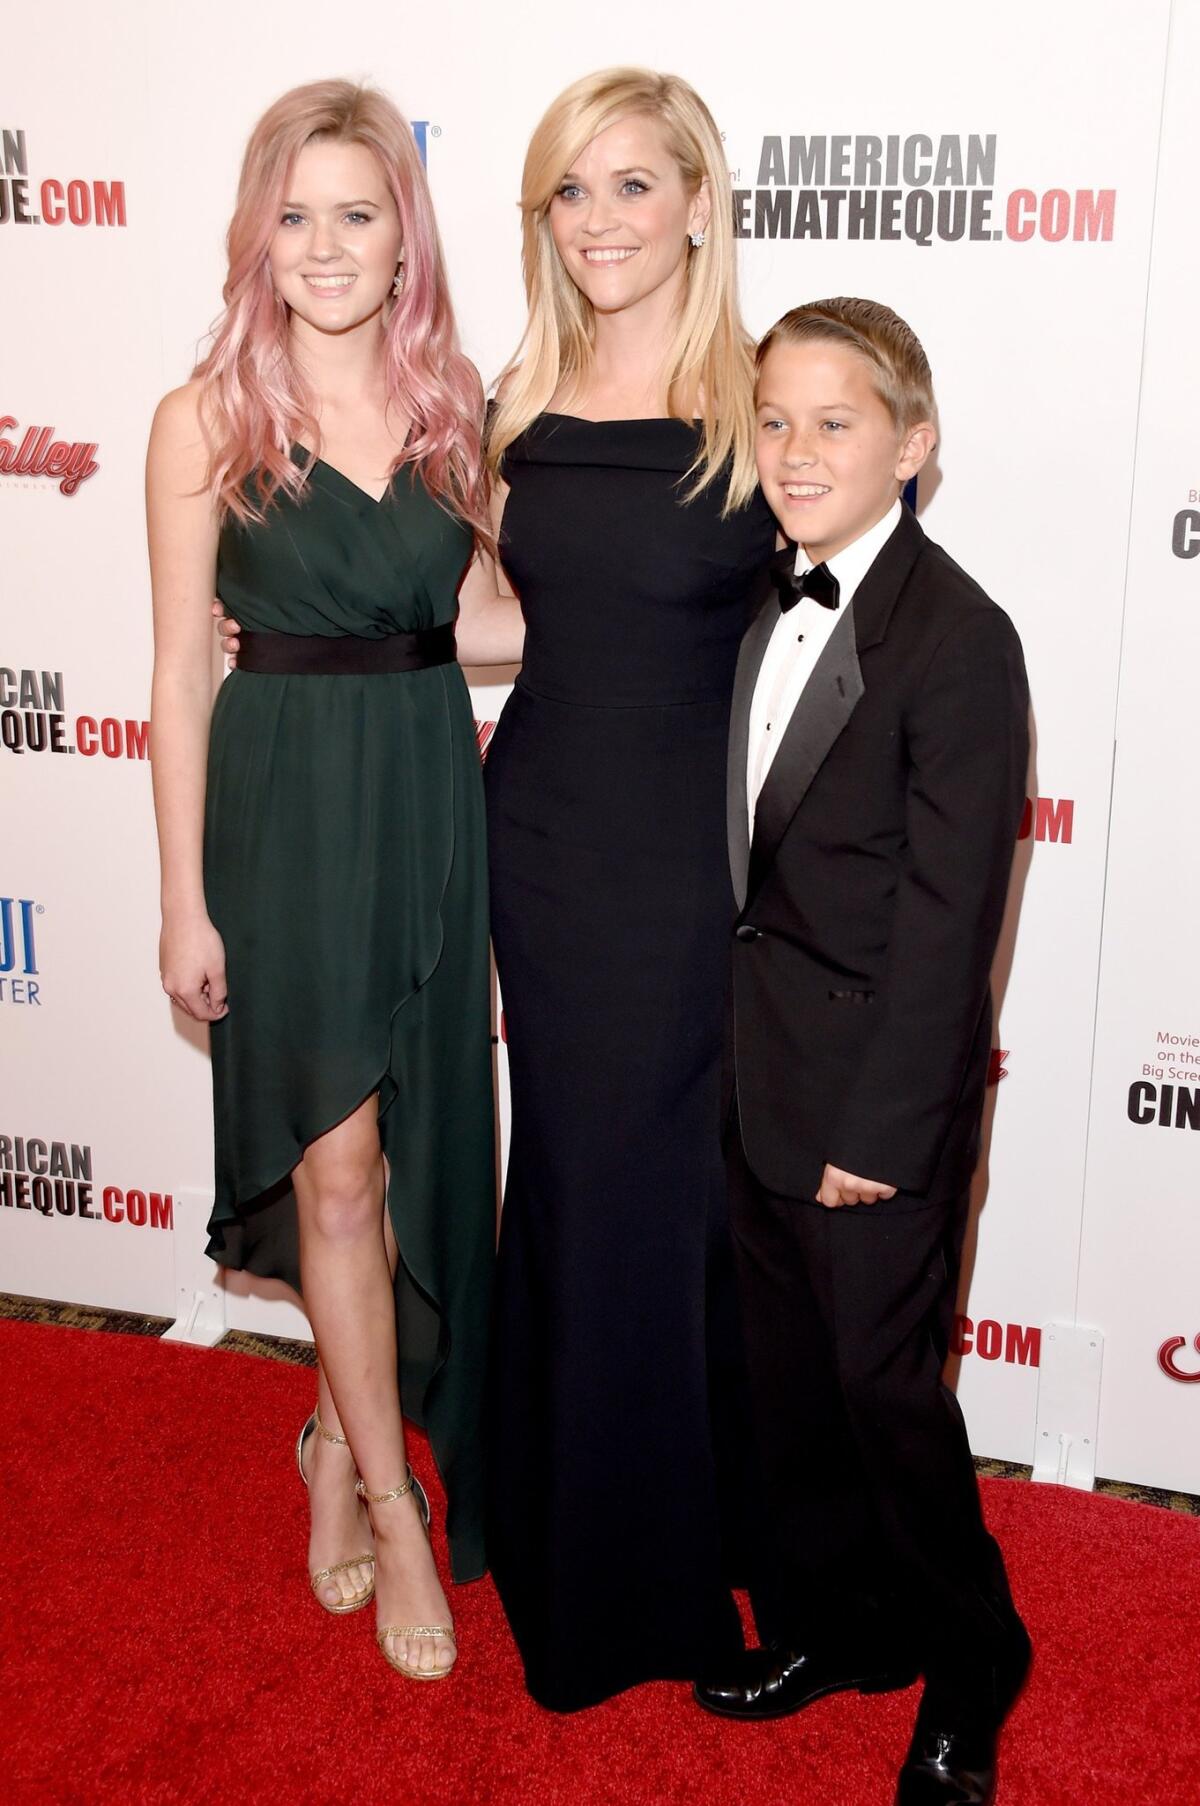 Reese Witherspoon is flanked by children Ava Phillippe and Deacon Phillippe at the 29th American Cinematheque Award honoring the actress on Friday in Los Angeles.